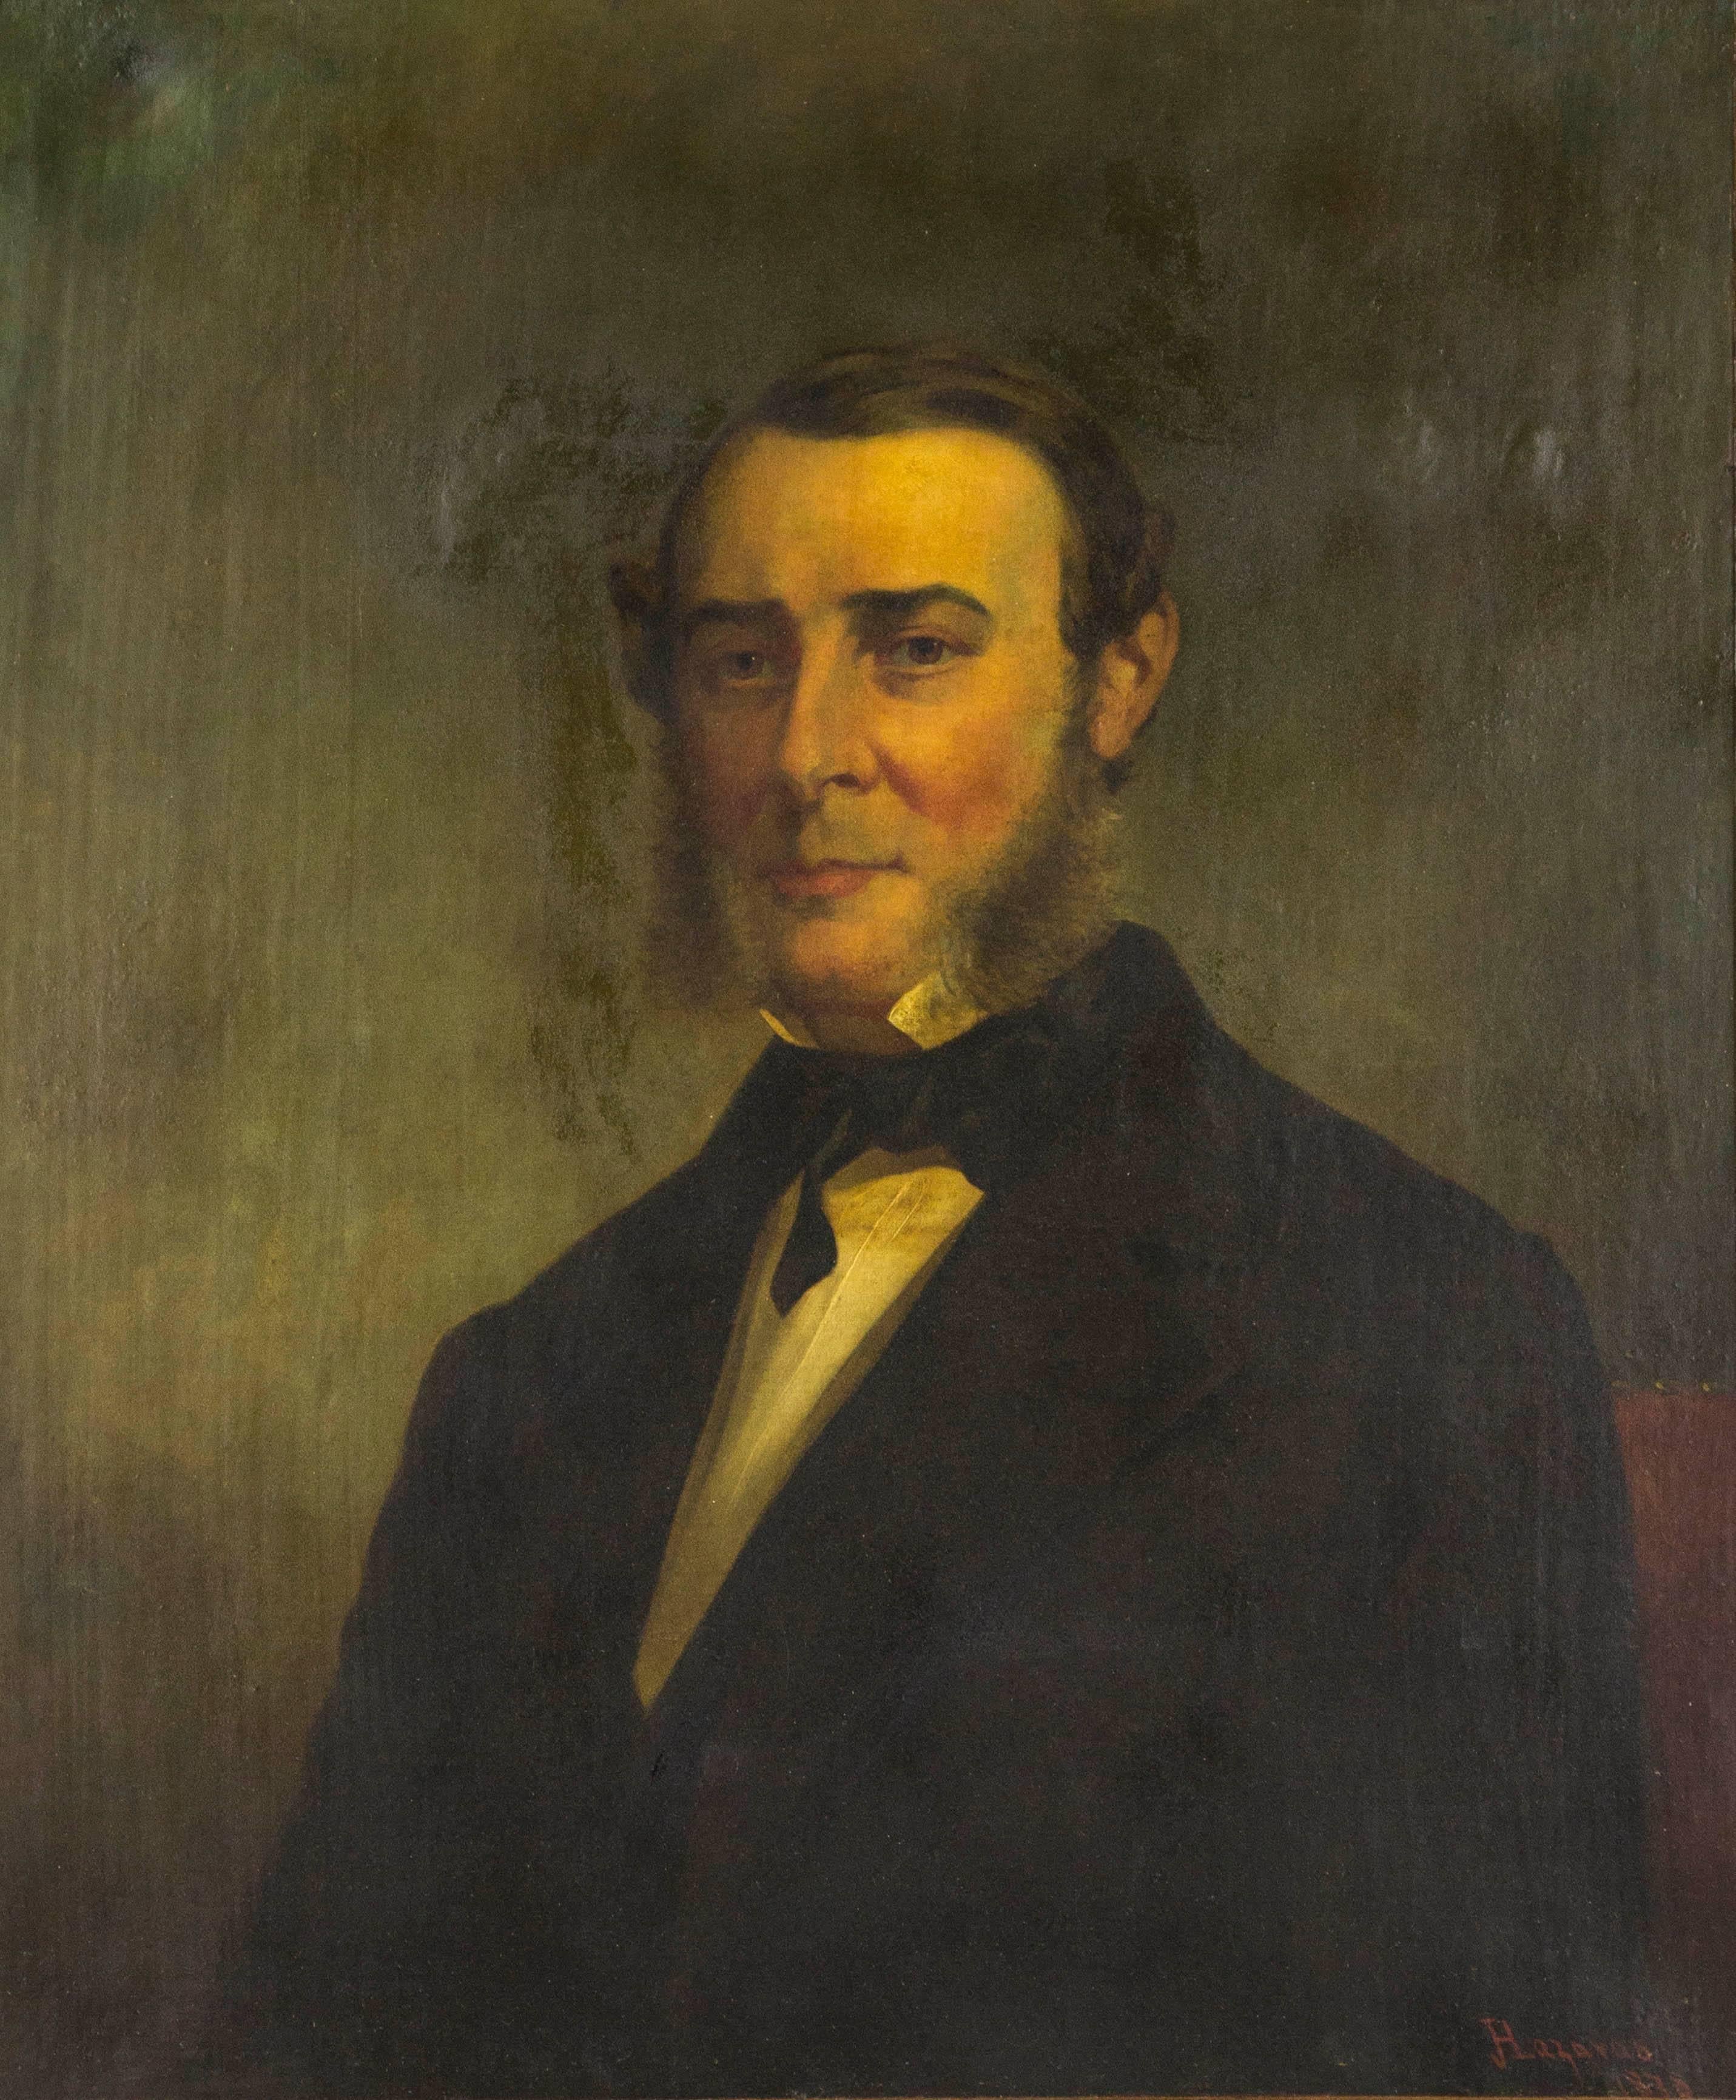 19th century oil portrait oil on canvas signed: Jacob Hart Lazarus

American
Signed and dated 1878
Original gilt frame
Oil on canvas
Vibrant colors
Provenance: Hy's Restaurant, Ottawa, Canada

$2450

B638
Image size 25